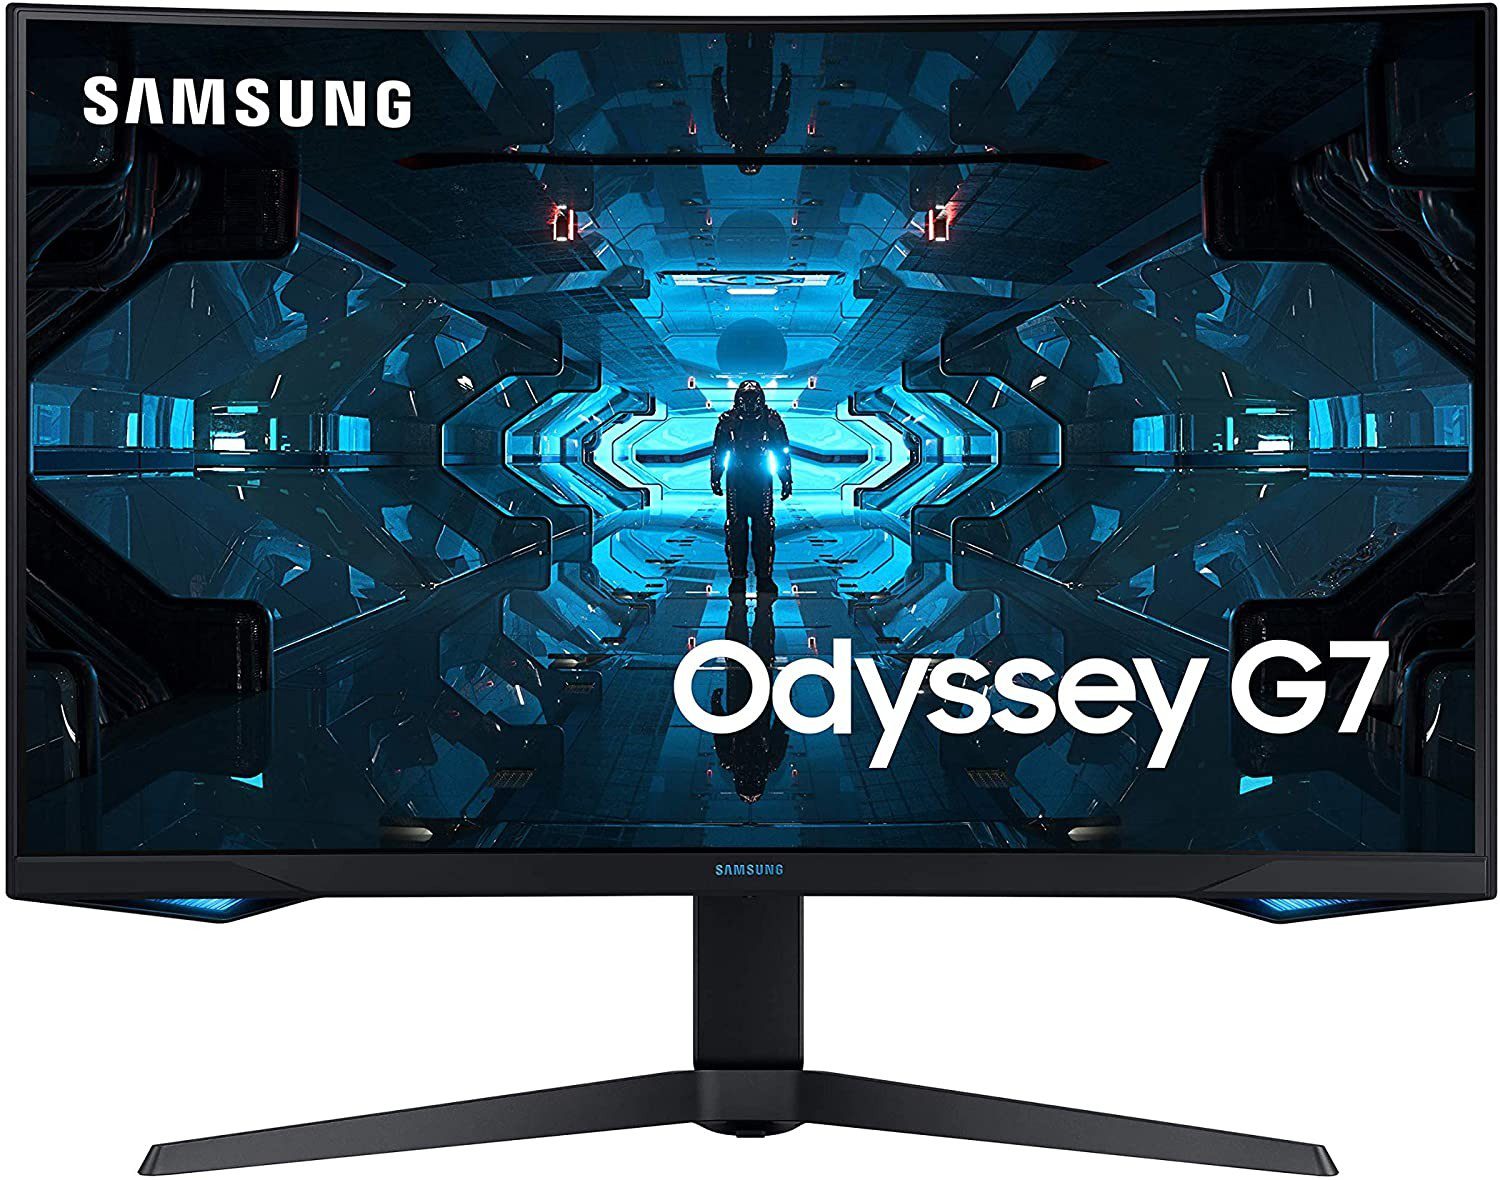 Samsung 32" Odyssey G7 Gaming Monitore With QHD 1000R Curved Screen 240Hz Refresh rate VESA display HDR10- LC32G75TQSMXUE